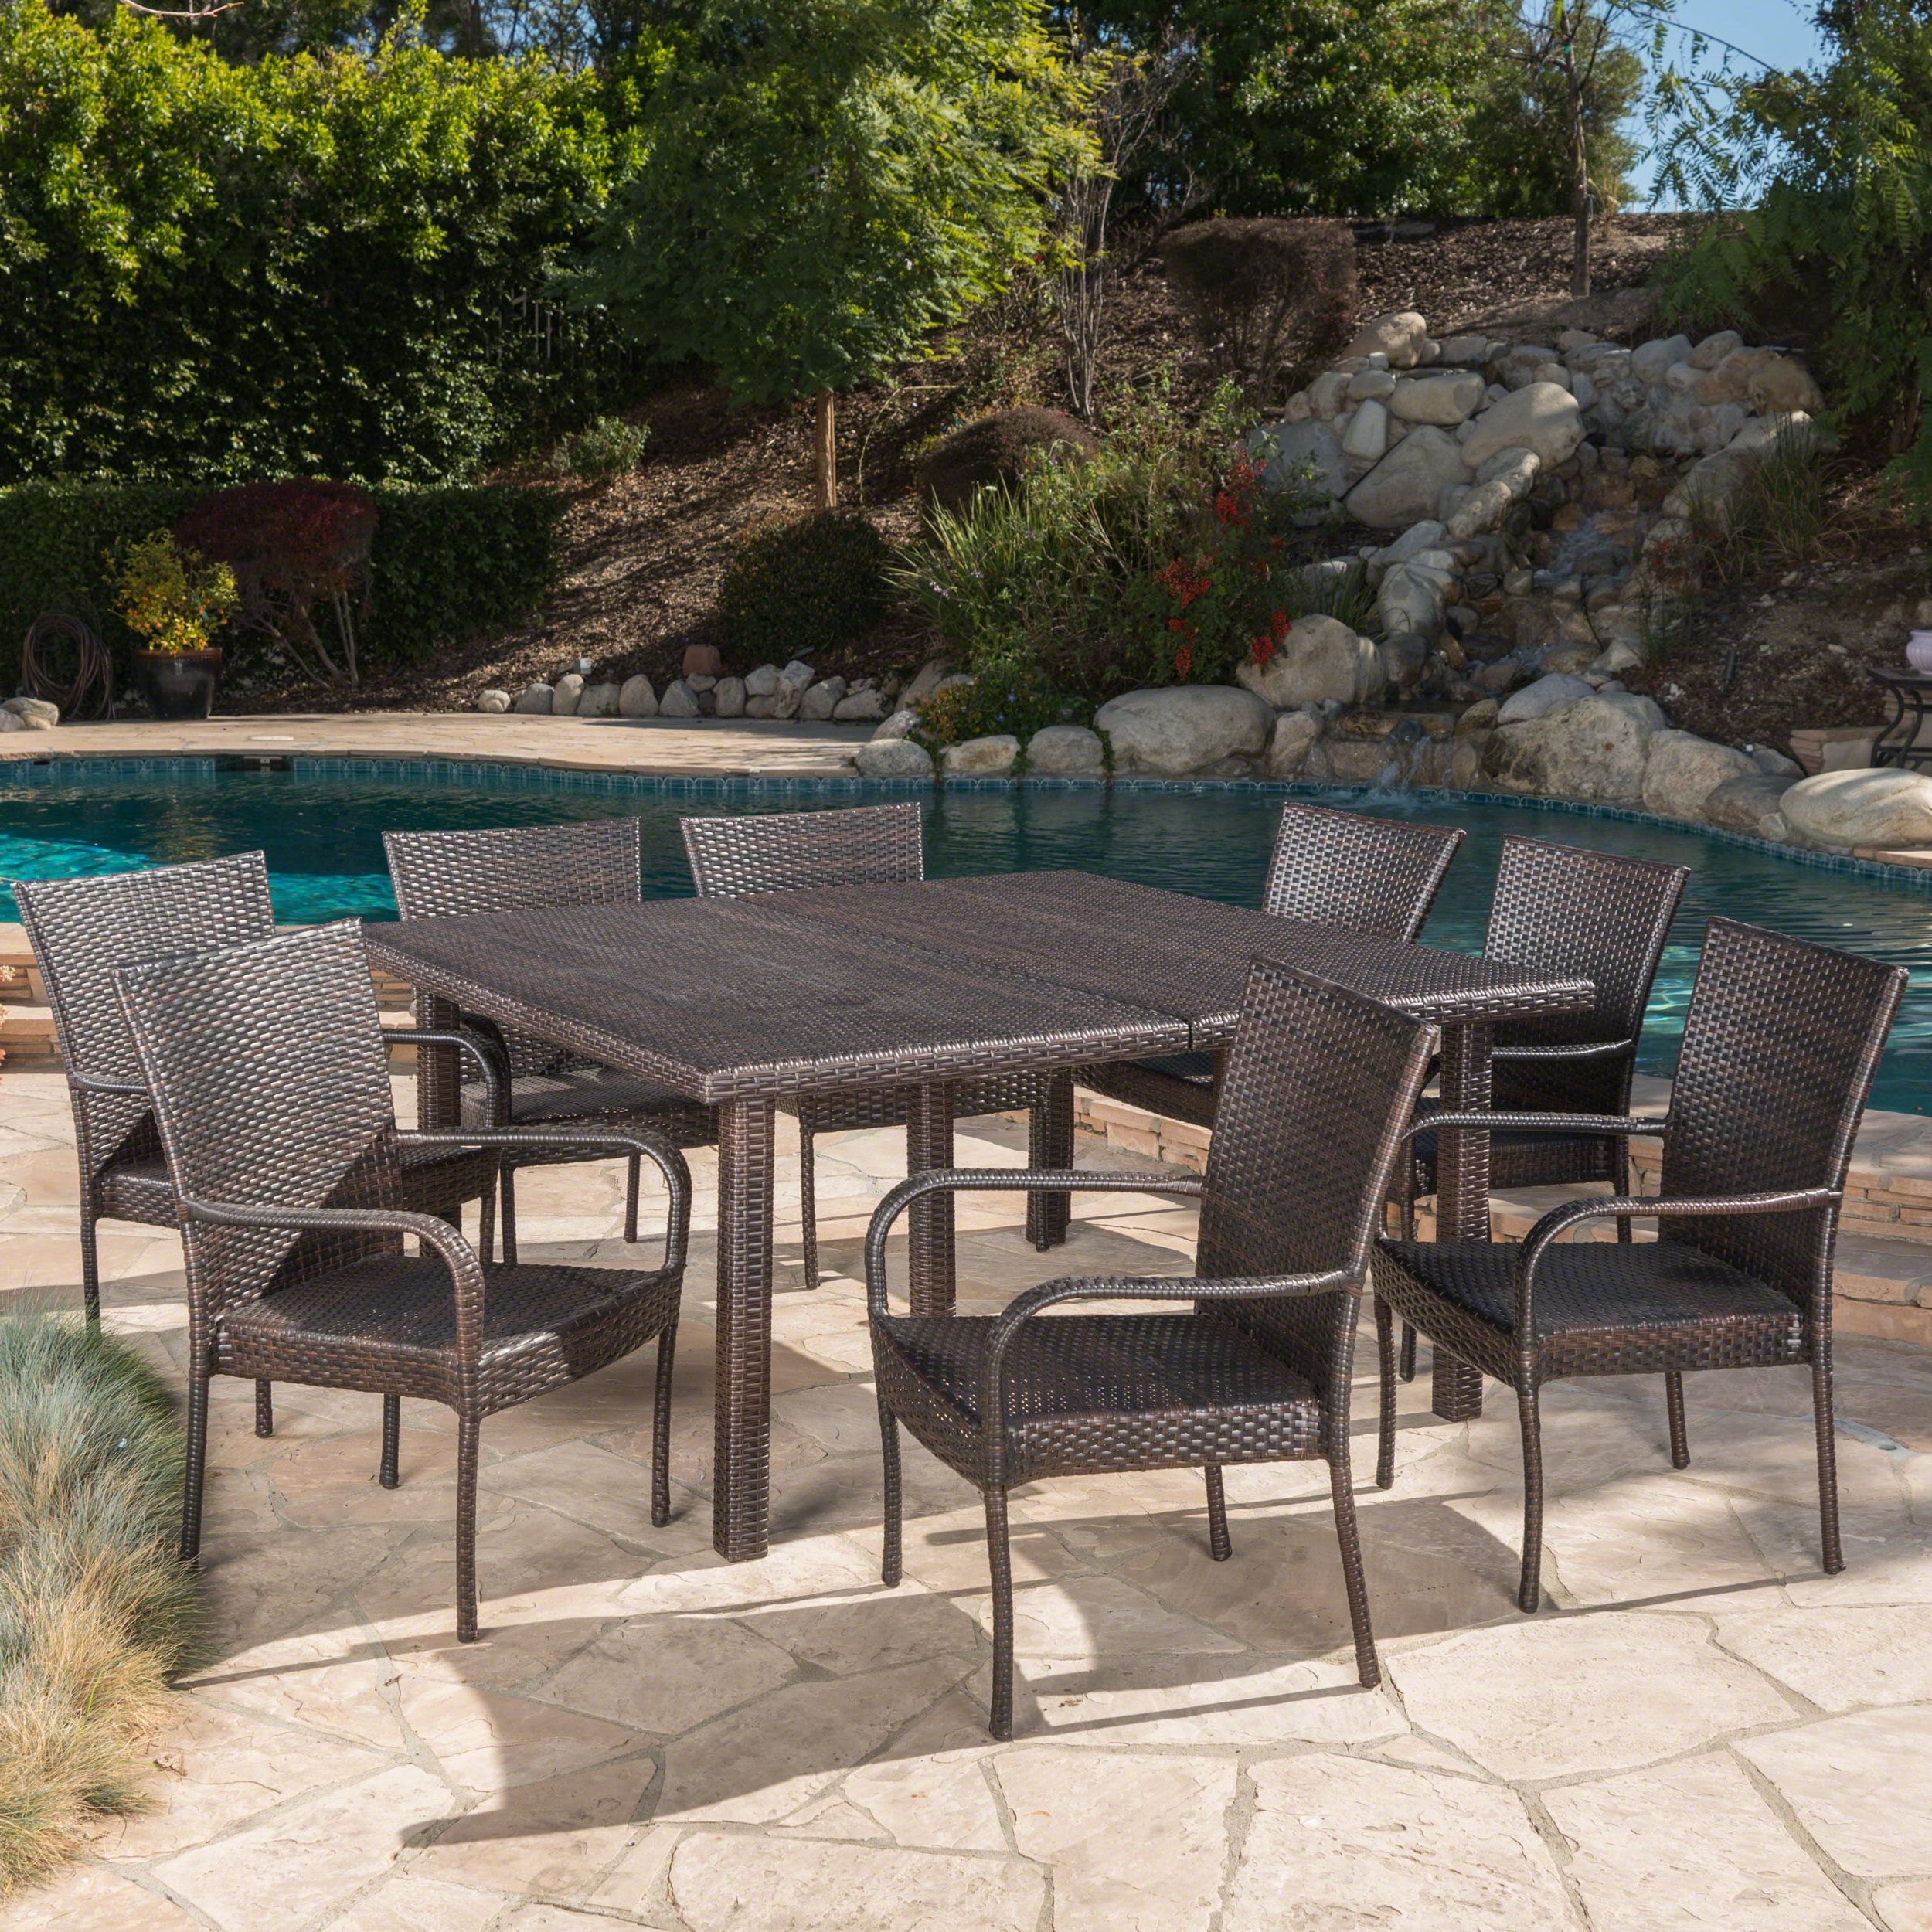 Trendy Fiona Outdoor 9 Piece Square Wicker Dining Setbrown 9 Piece Sets (View 13 of 15)